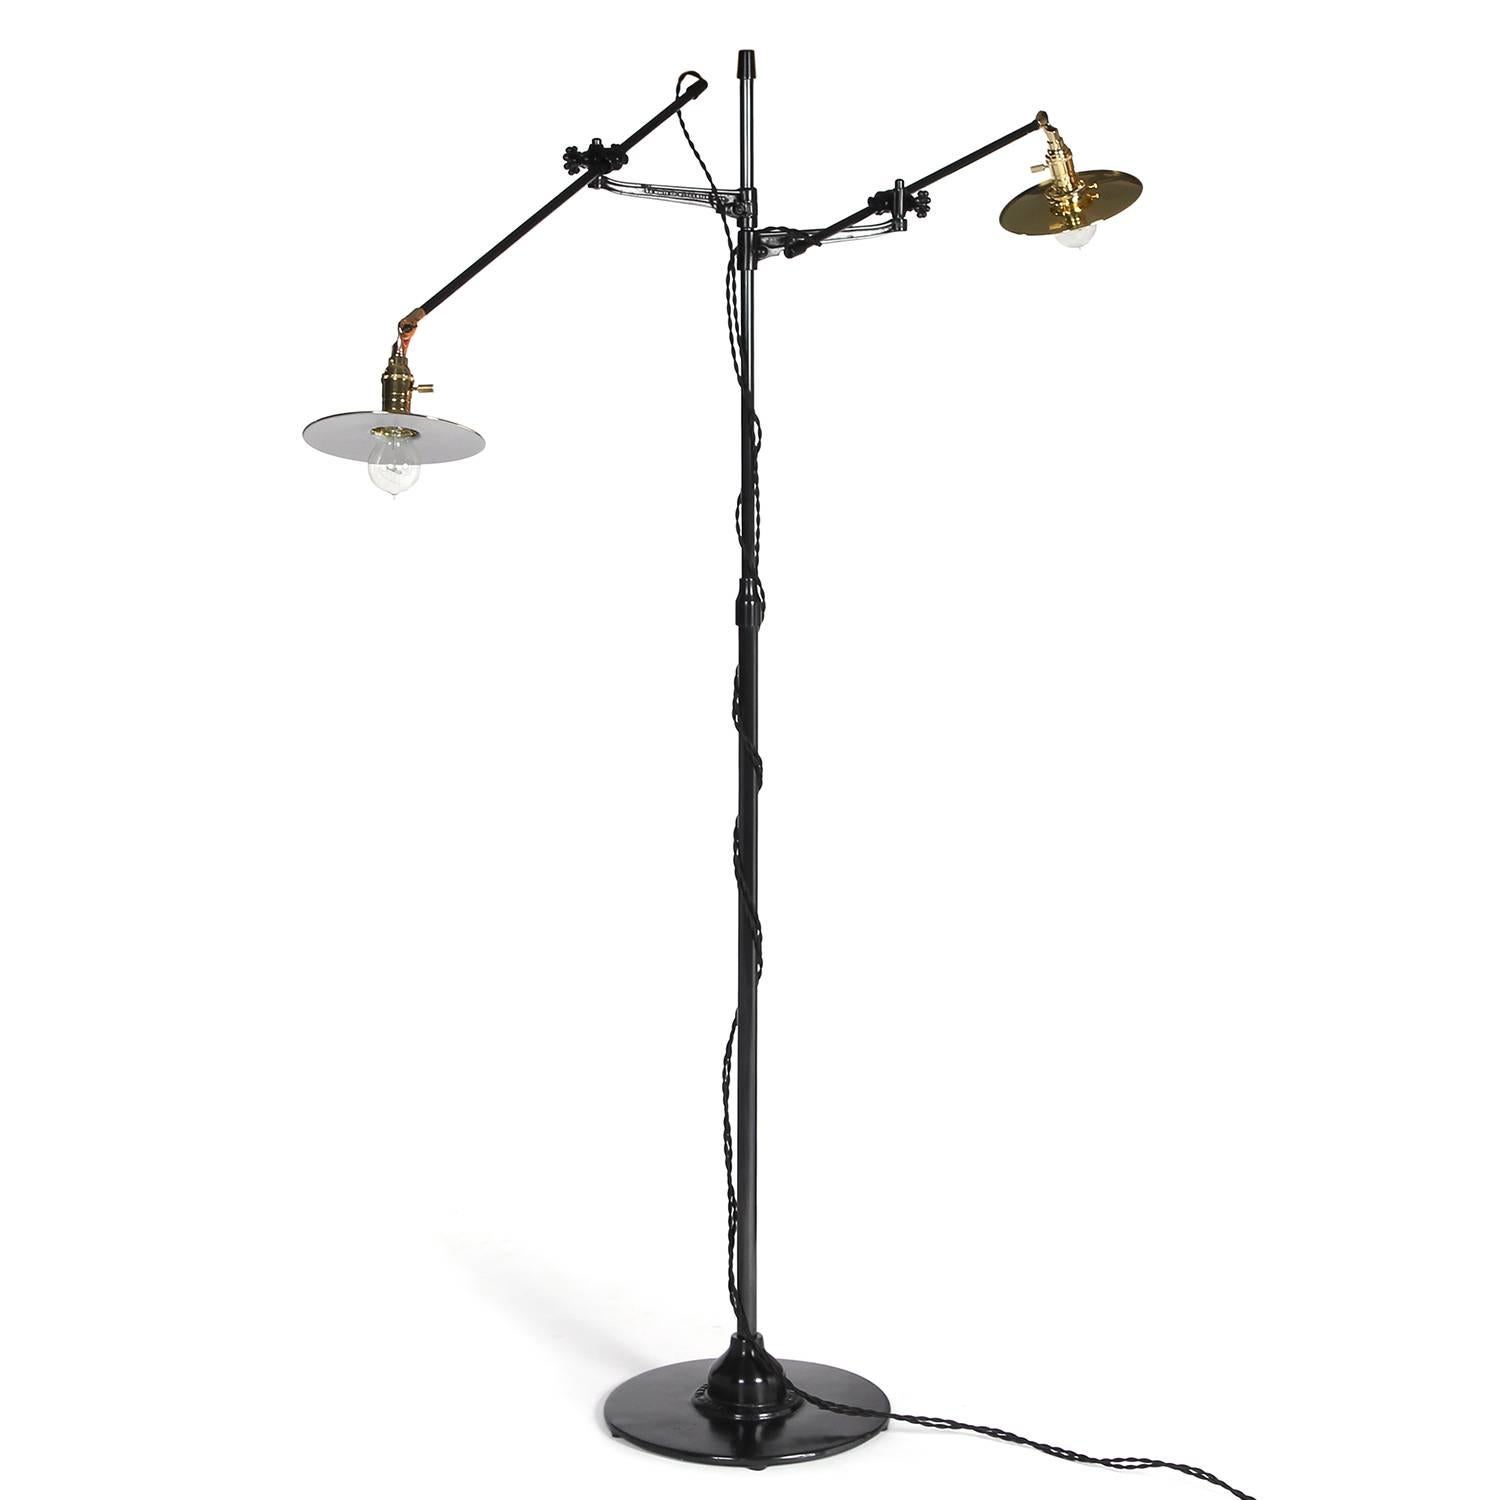 An impressively scaled and finely fabricated floor lamp in patinated steel and polished brass having two articulating arms that also can be adjusted vertically, rising from a stepped disc base.